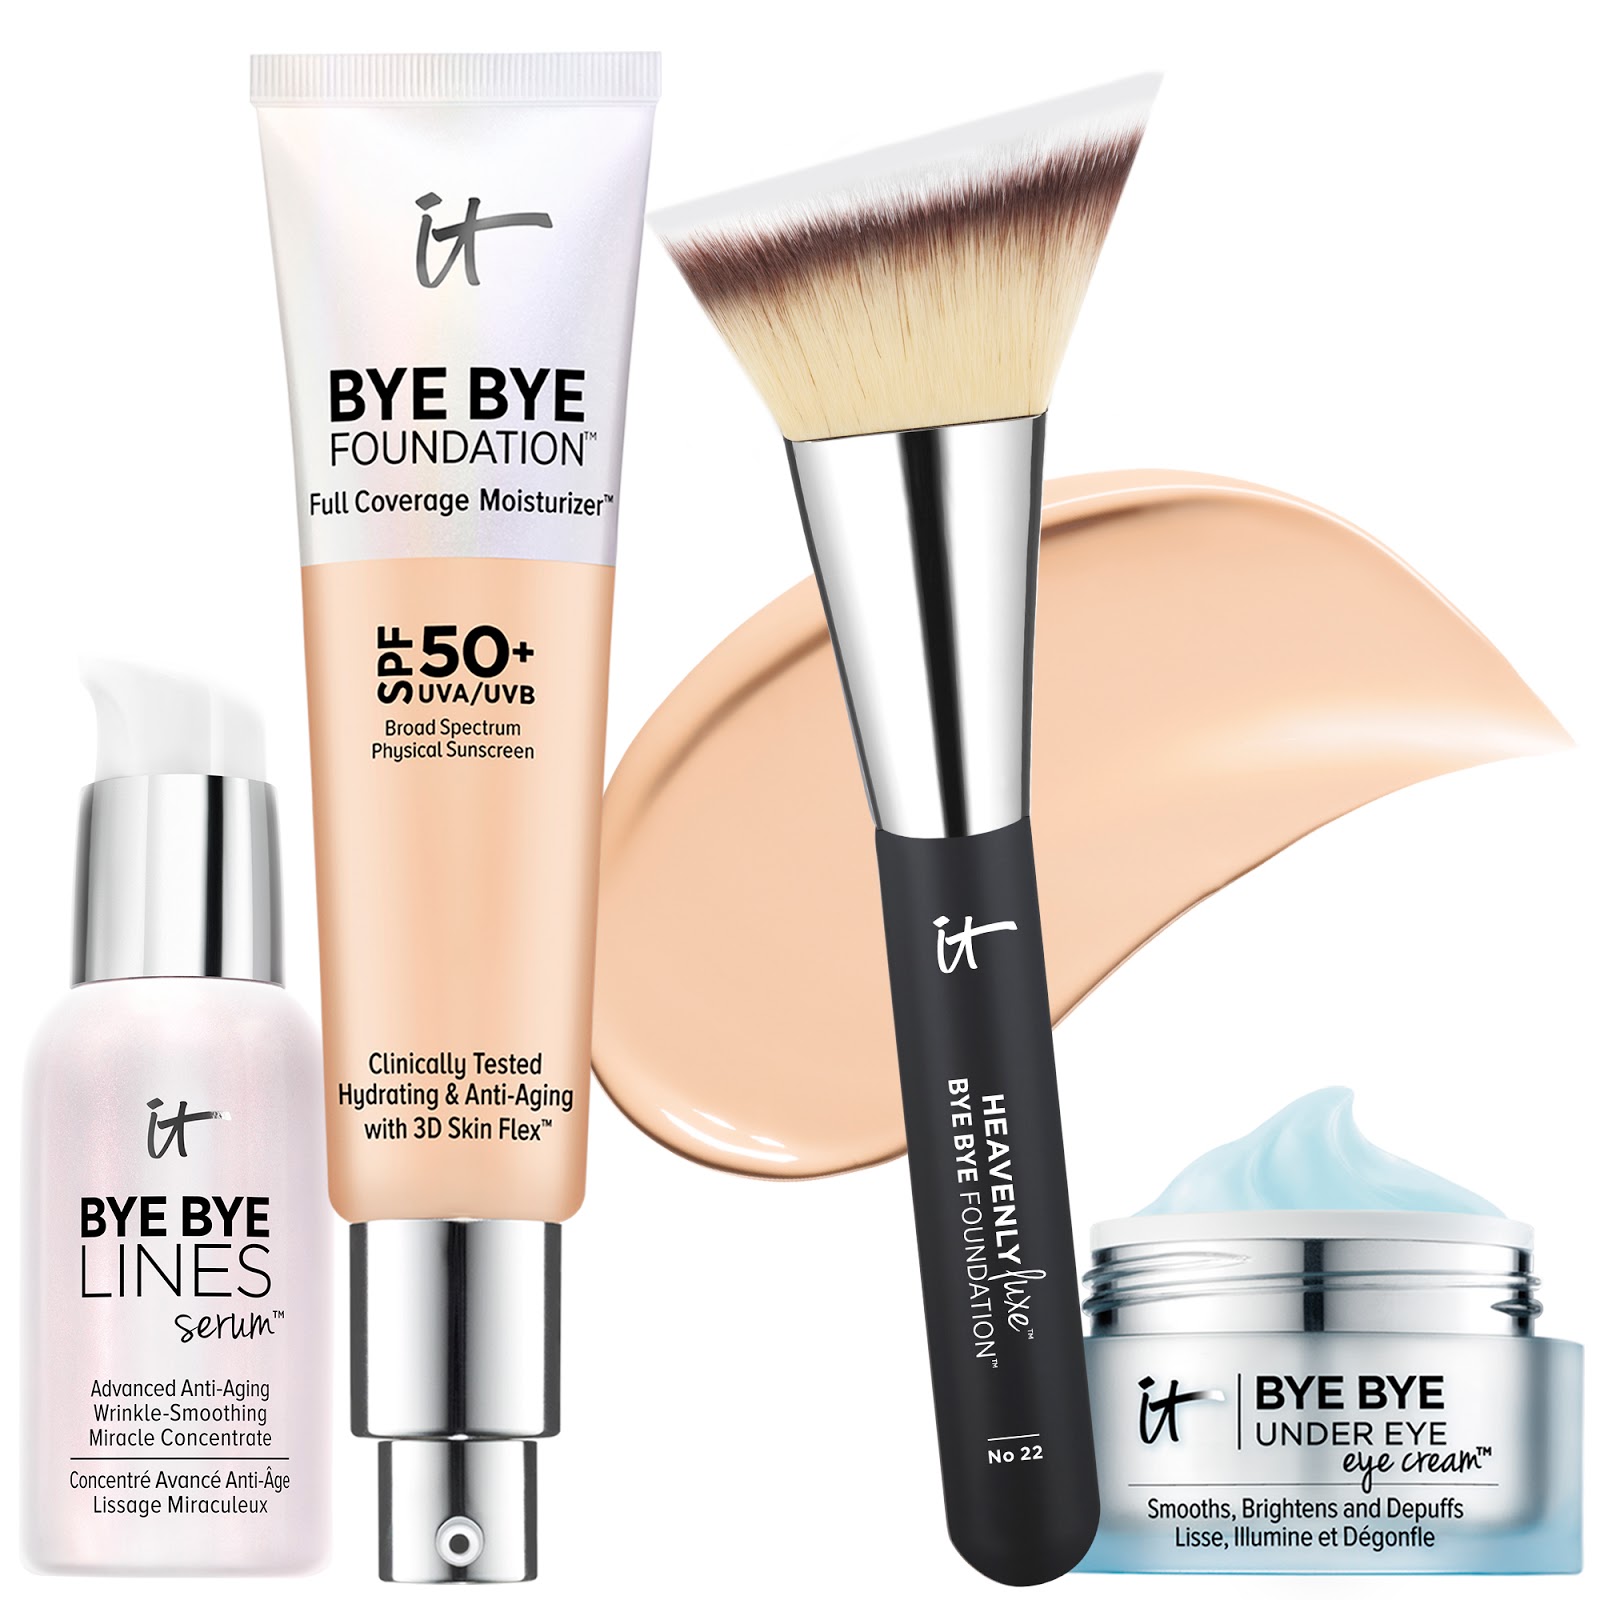 May косметика. In2it косметика. Hydrating Full coverage Foundation. It Cosmetics Bye Bye lines.